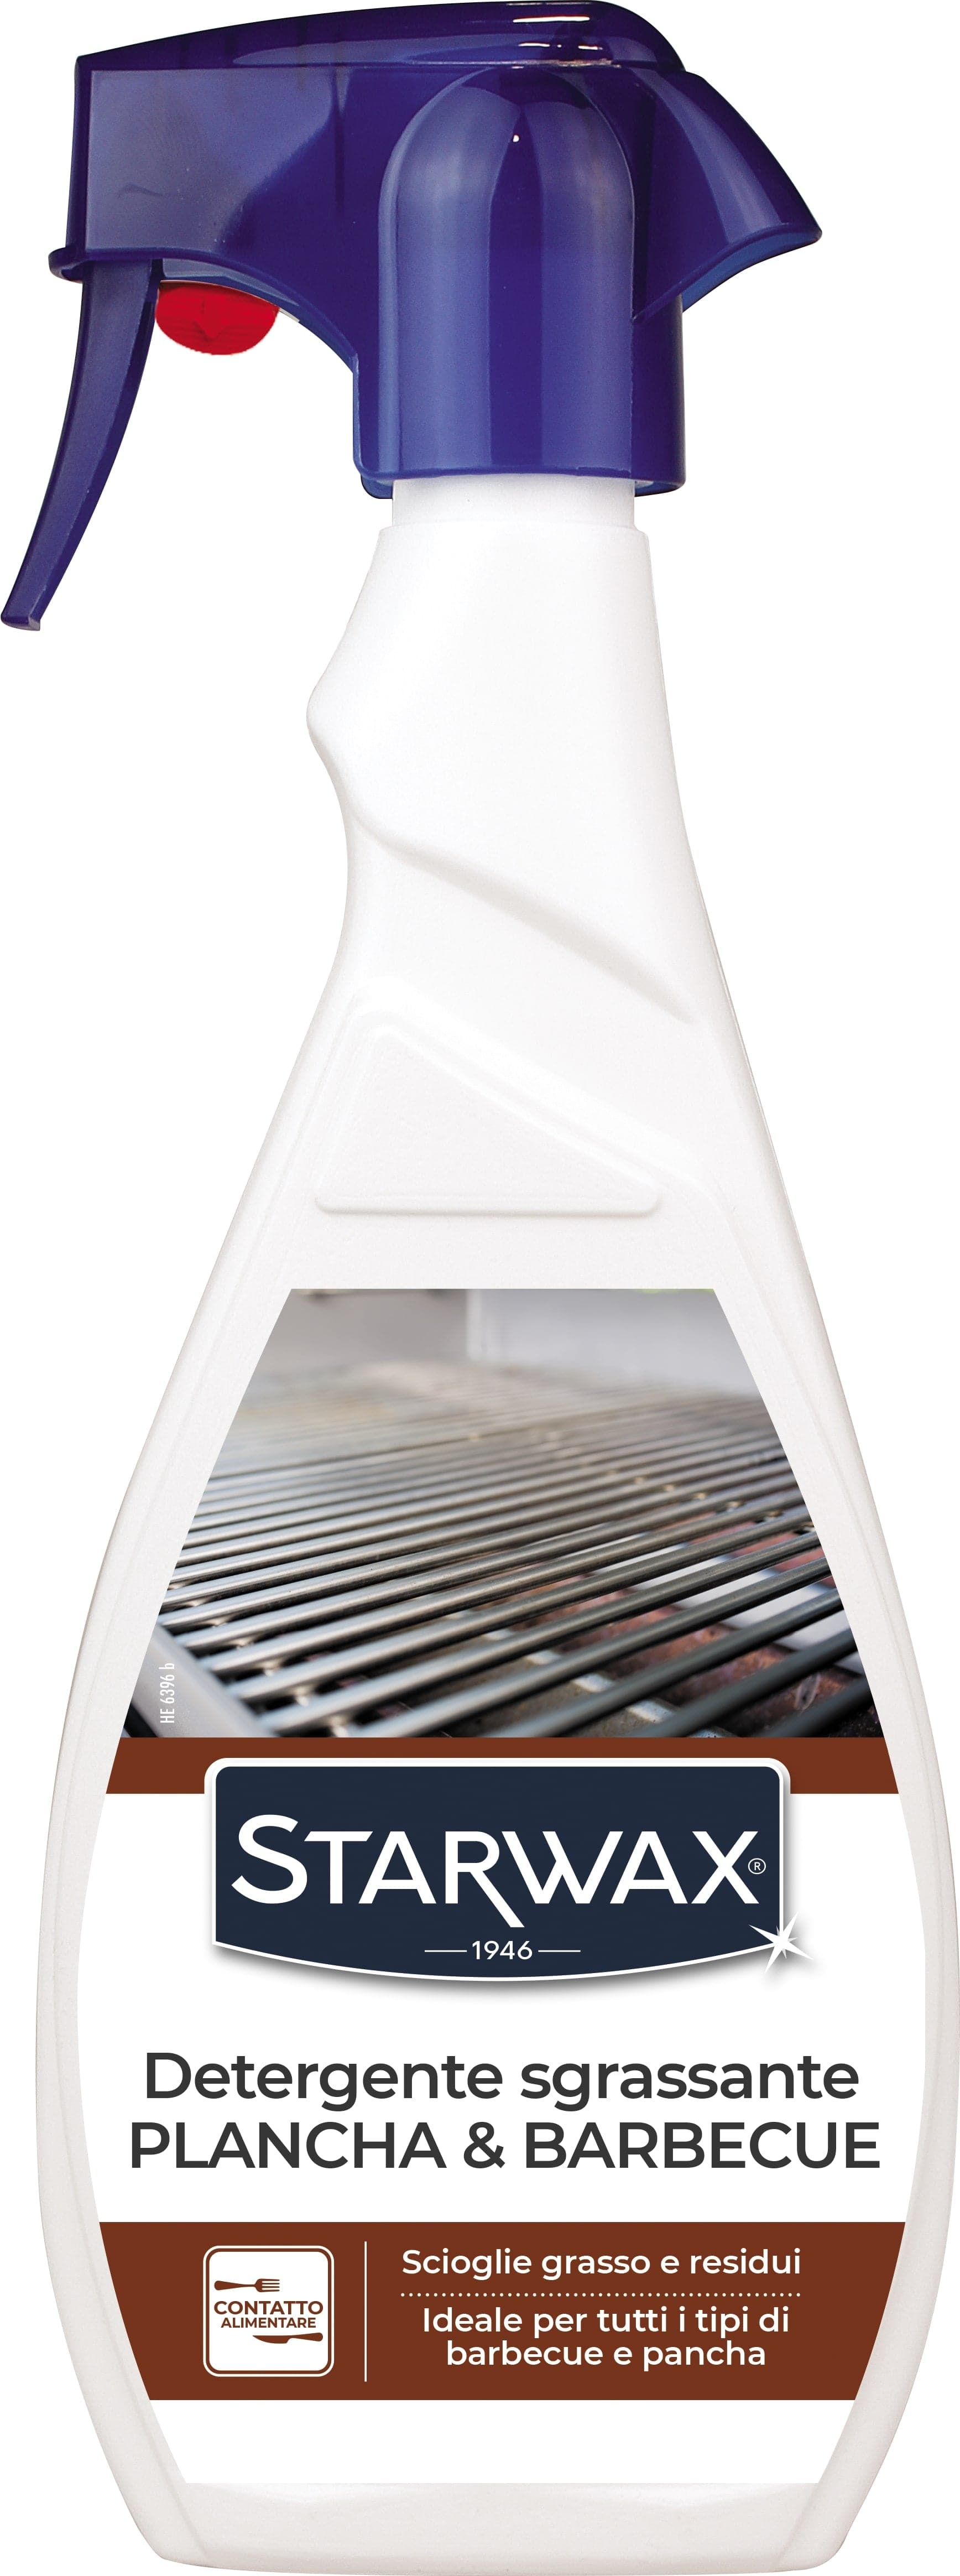 BBQ GRILL CLEANER AND ACCESSORIES